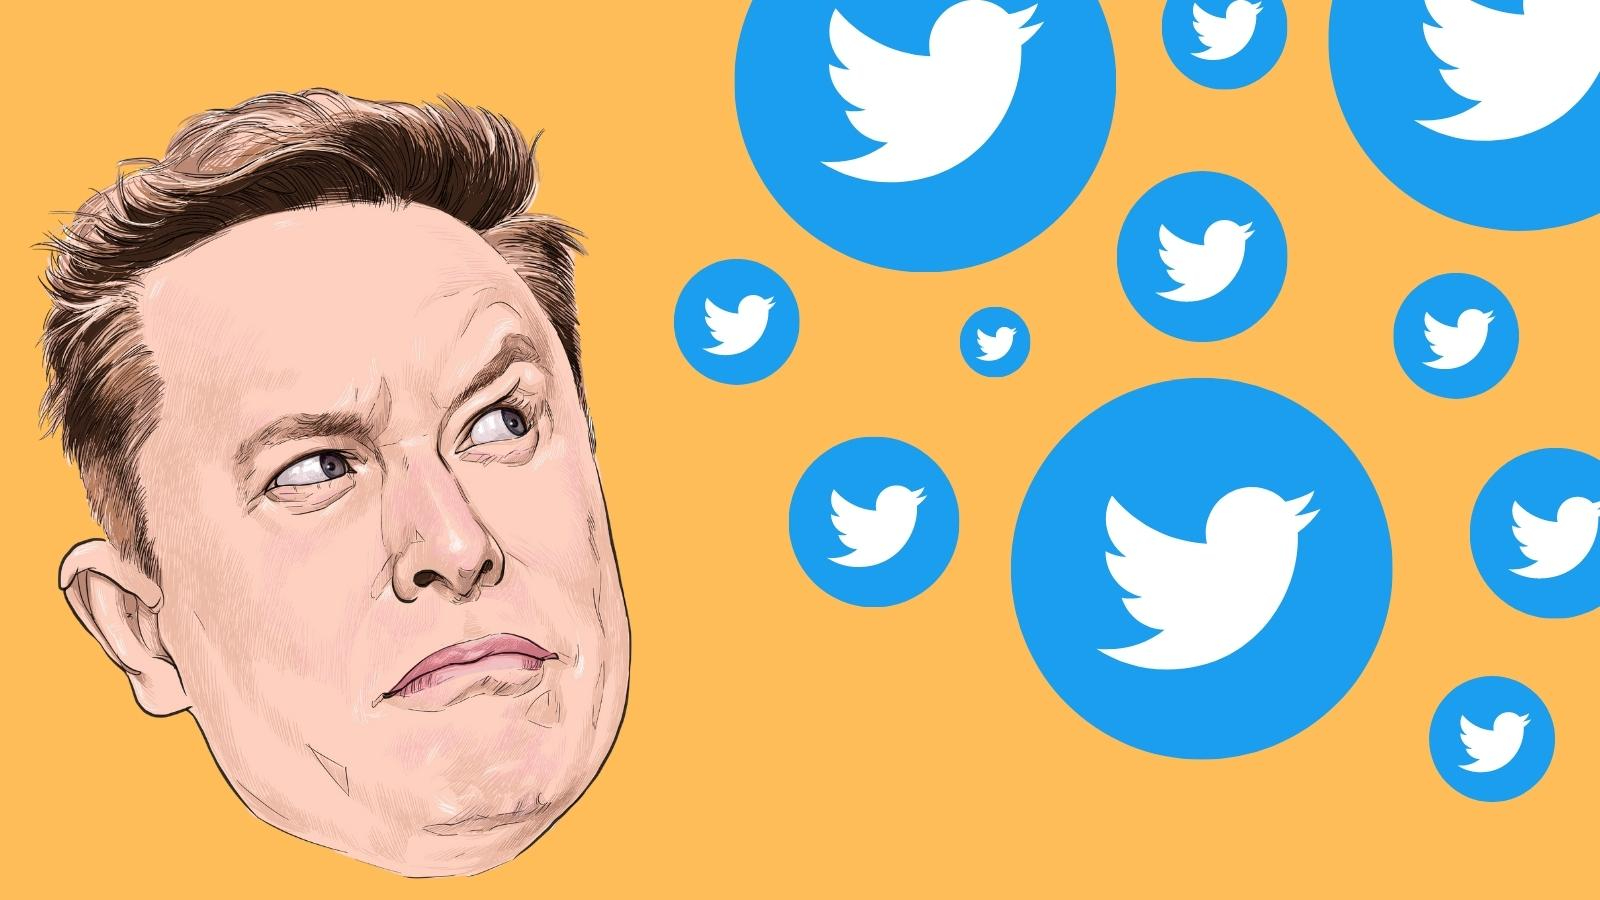 thongyhod's illustration of Elon Musk confused looking at the falling Twitter logo